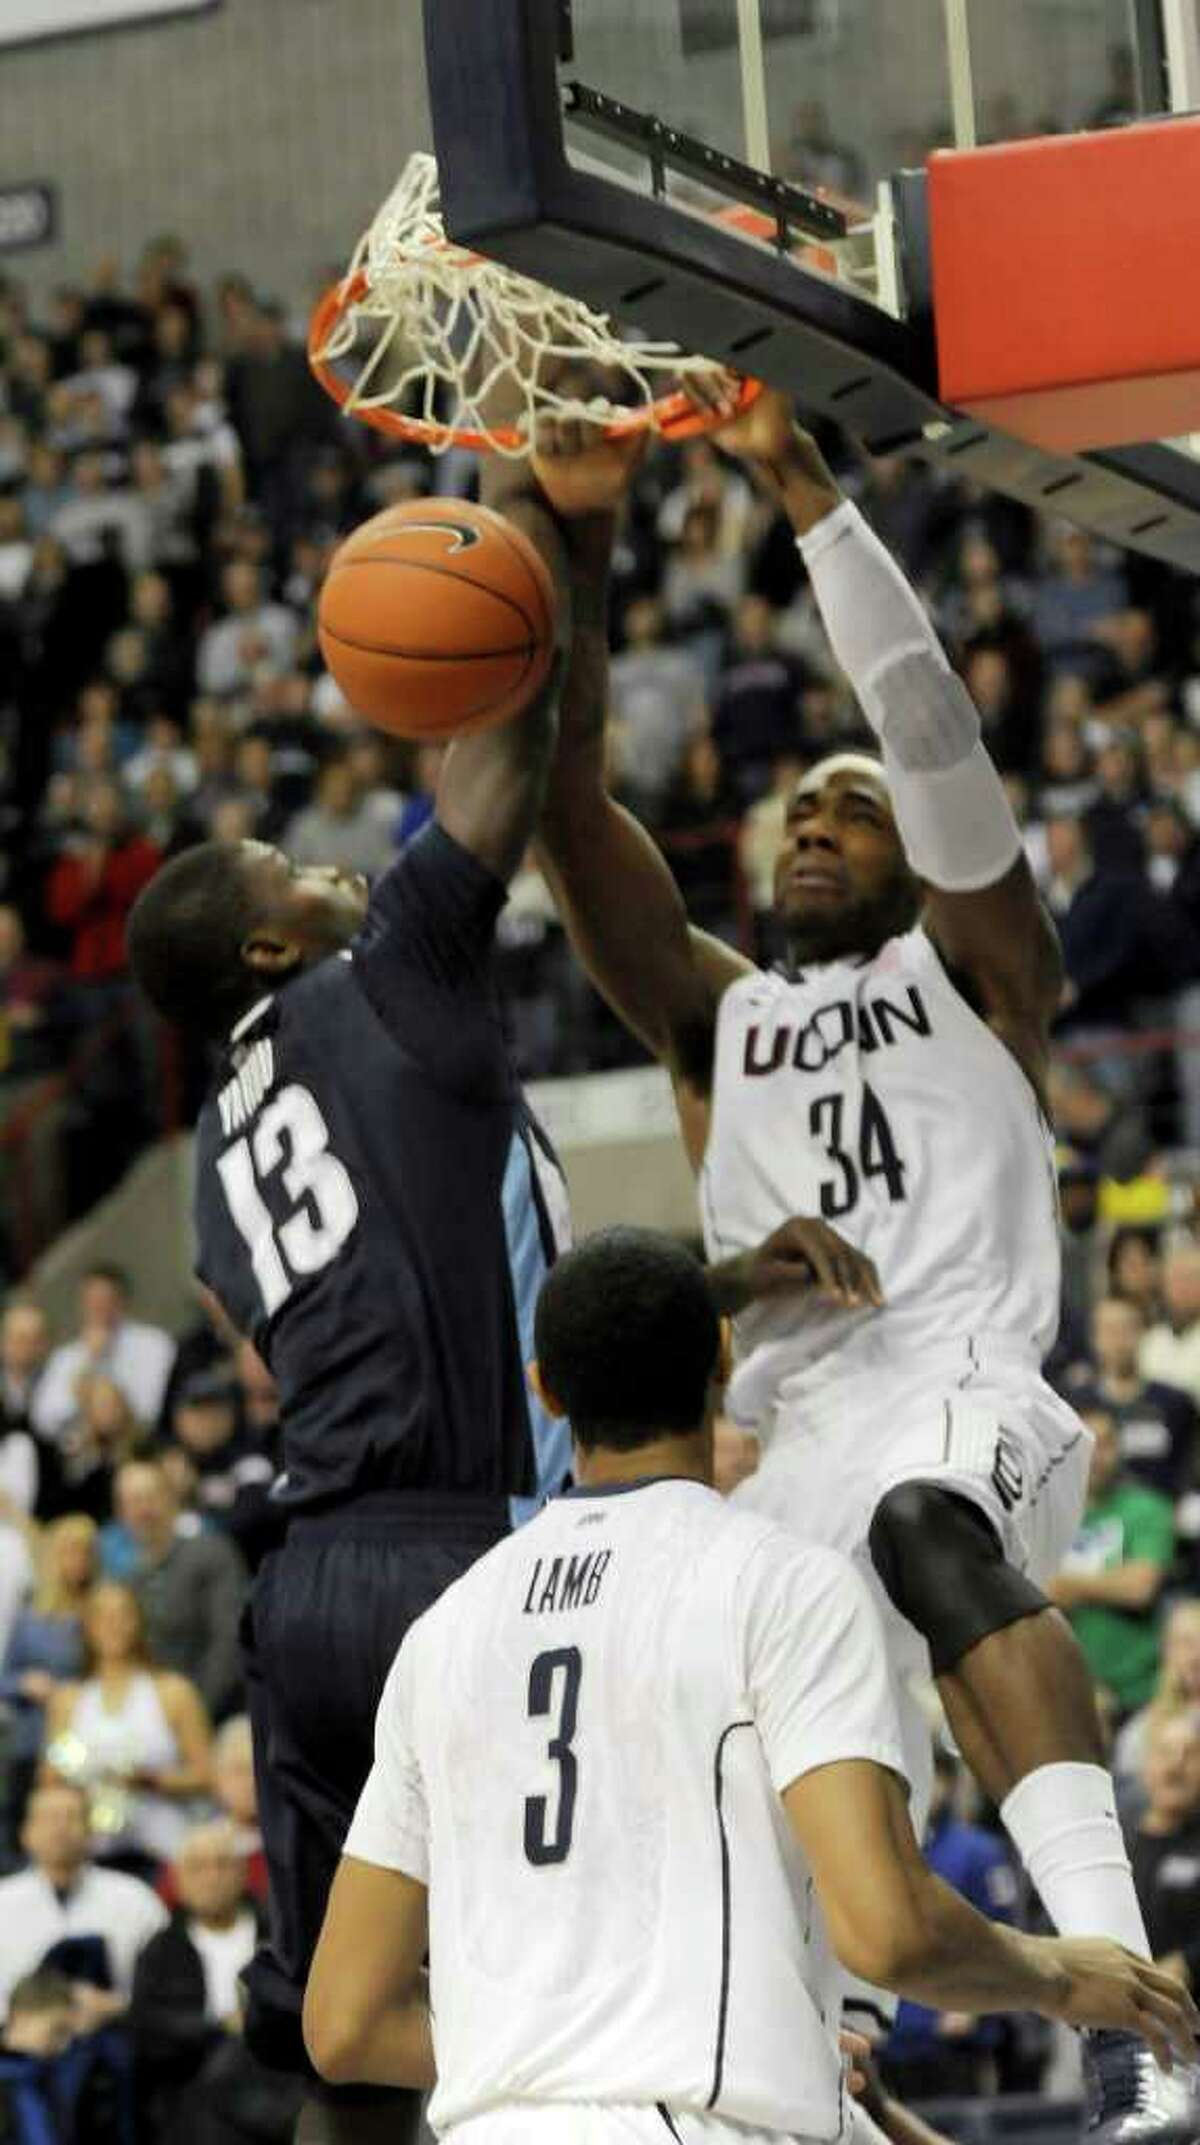 Connecticut's Alex Oriakhi dunks the ball as Villanova's Mouphtaou Yarou of Benin tries to stop him in the first half of an NCAA men's college basketball game at Storrs, Conn., Monday, Jan. 17, 2011. Watching is Connecticut's Jeremy Lamb. (AP Photo/Bob Child)